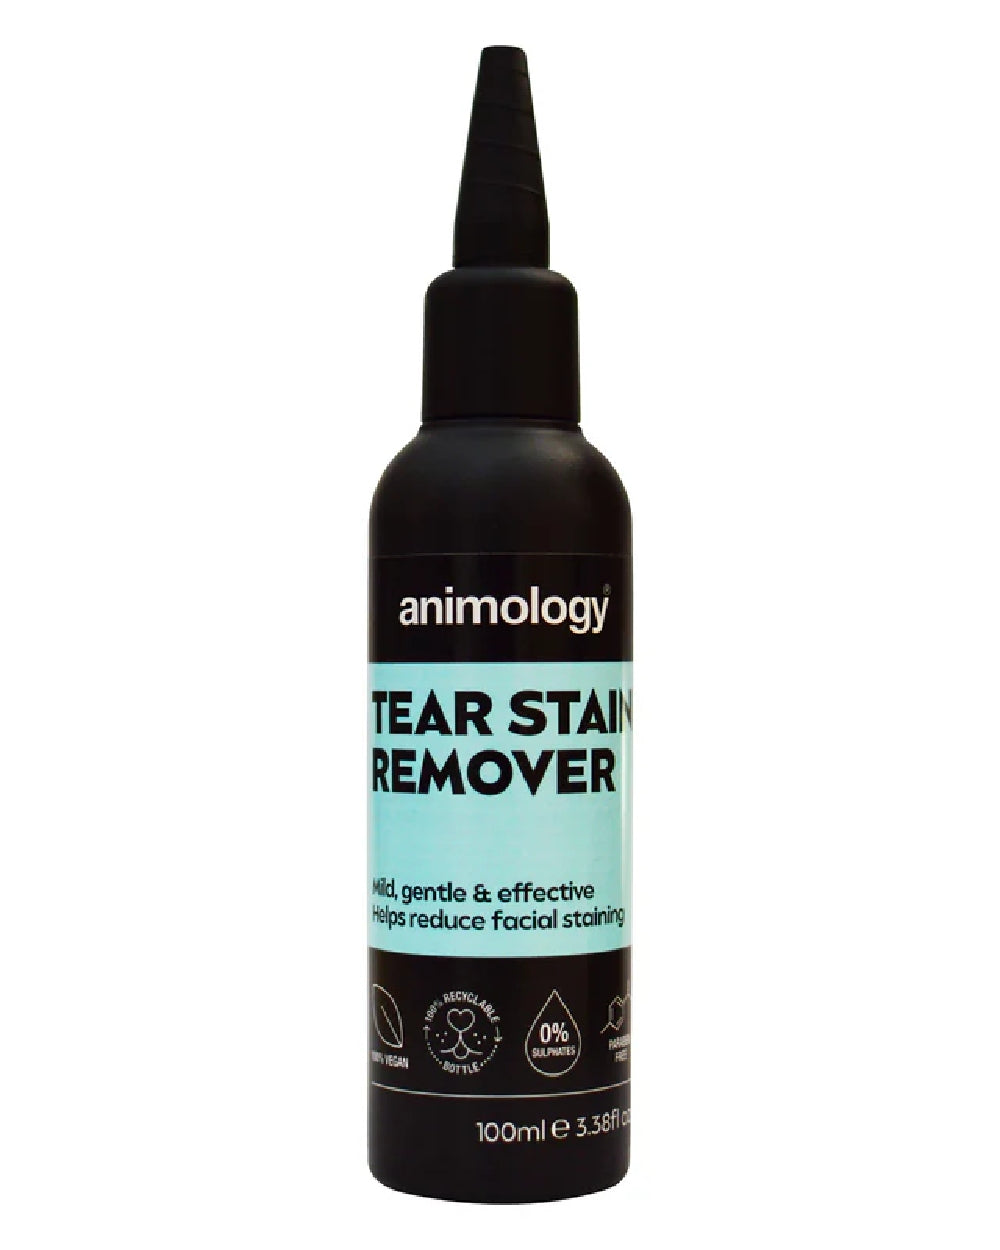 Animology Tear Stain Remover 100ml on white background